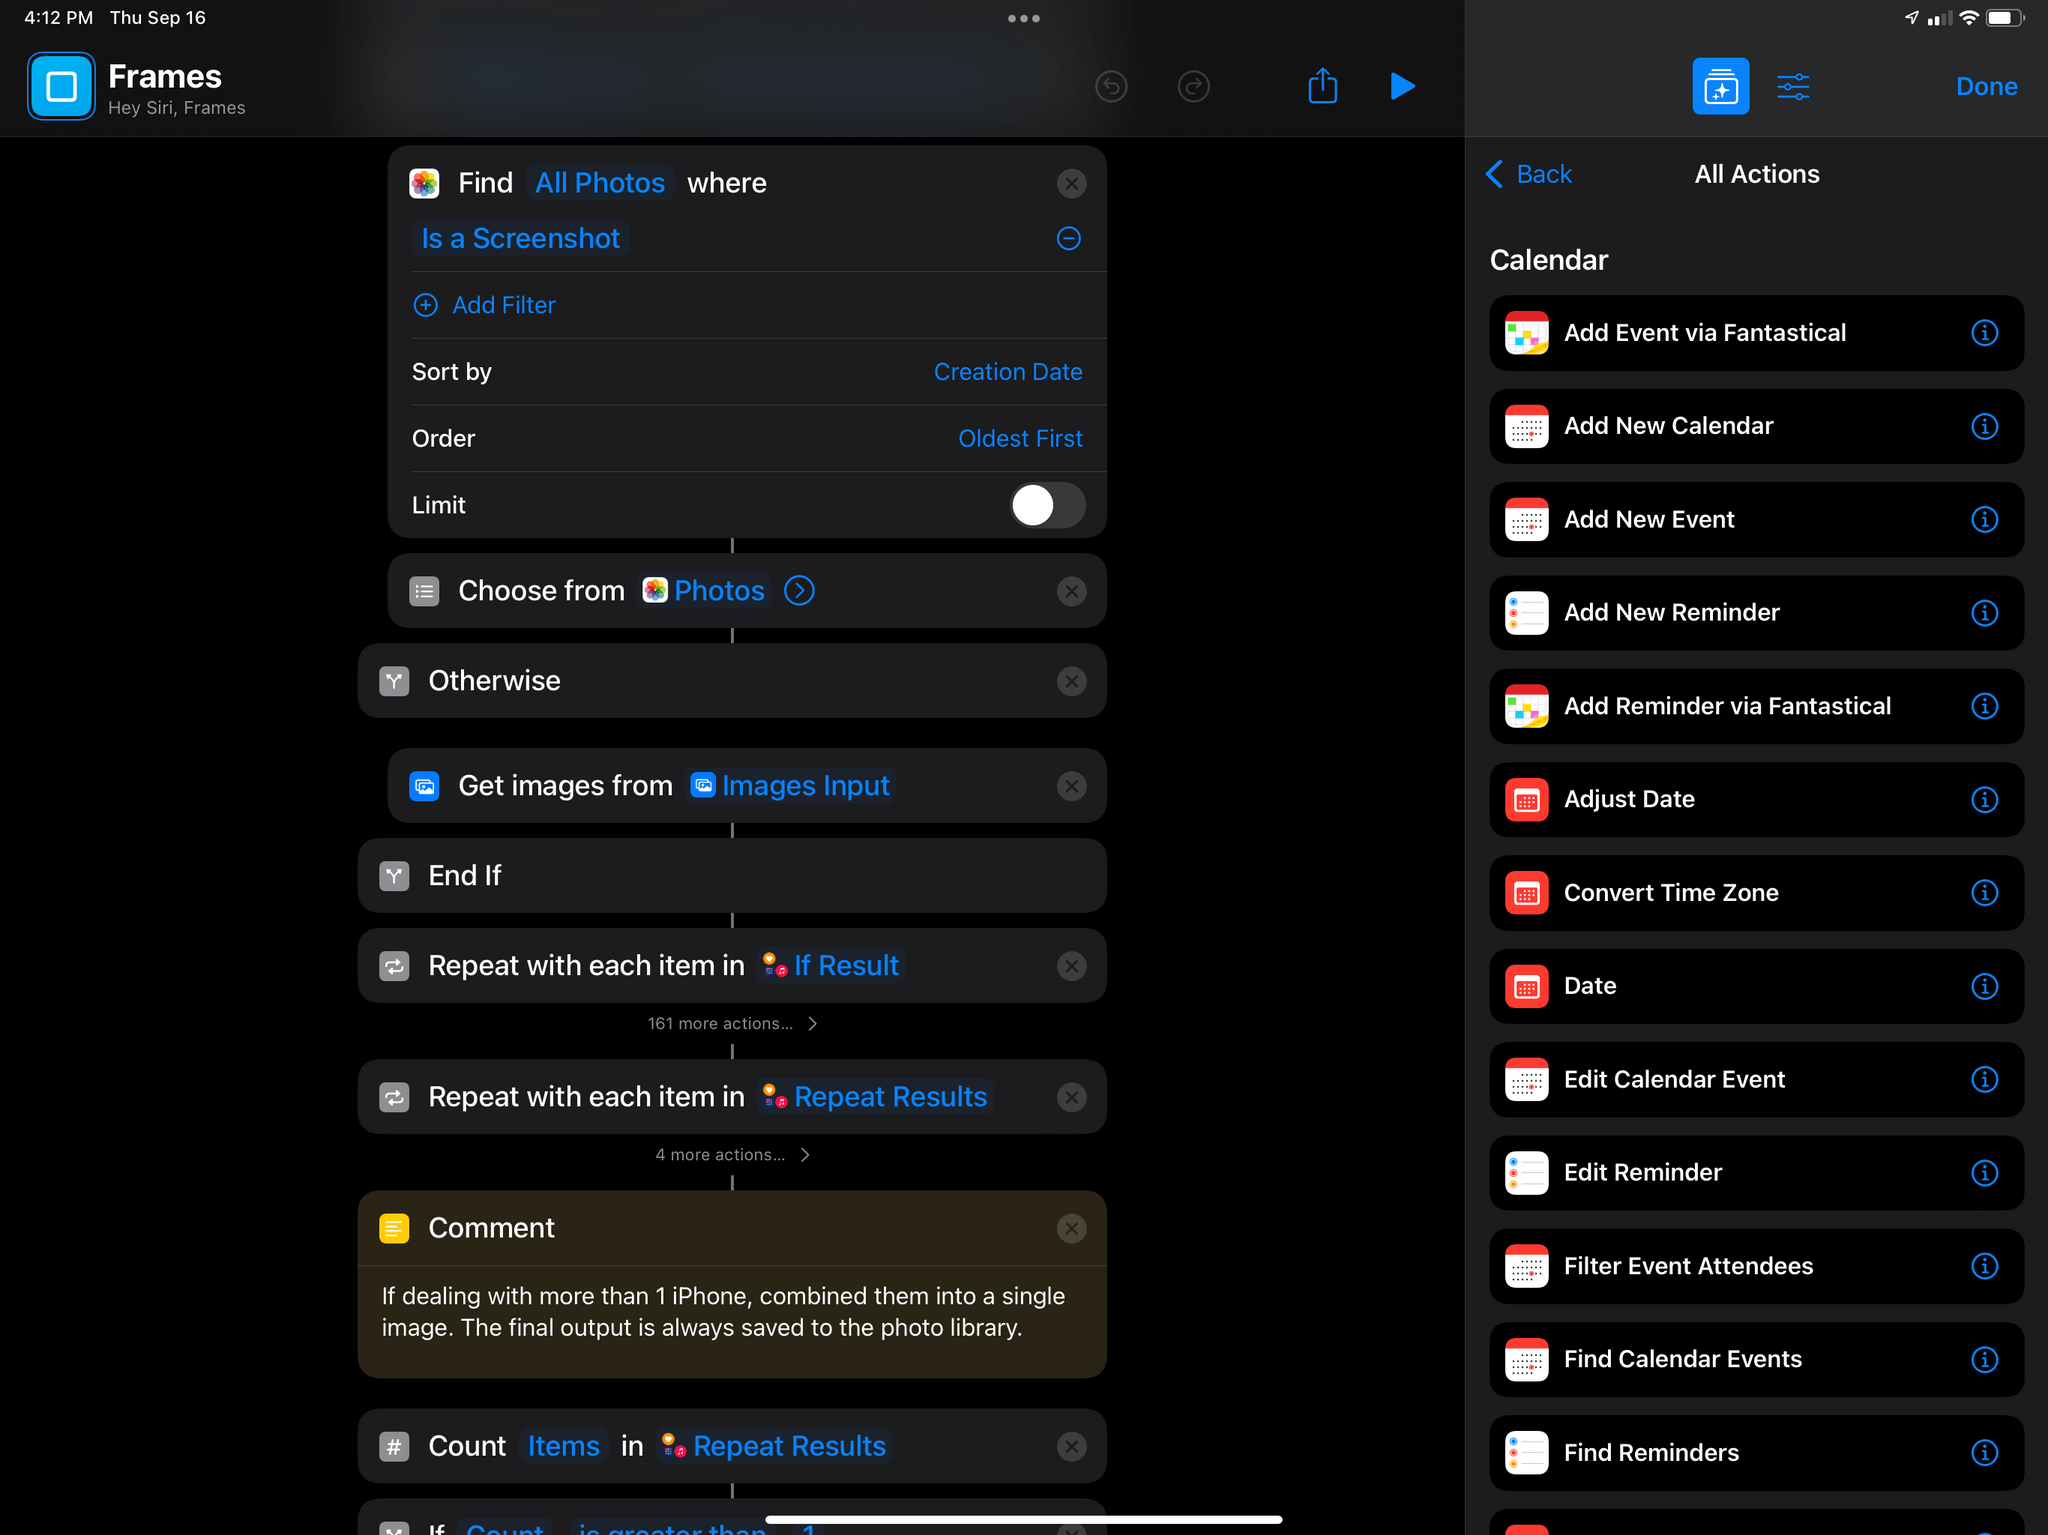 Browsing all actions in iPadOS 15.